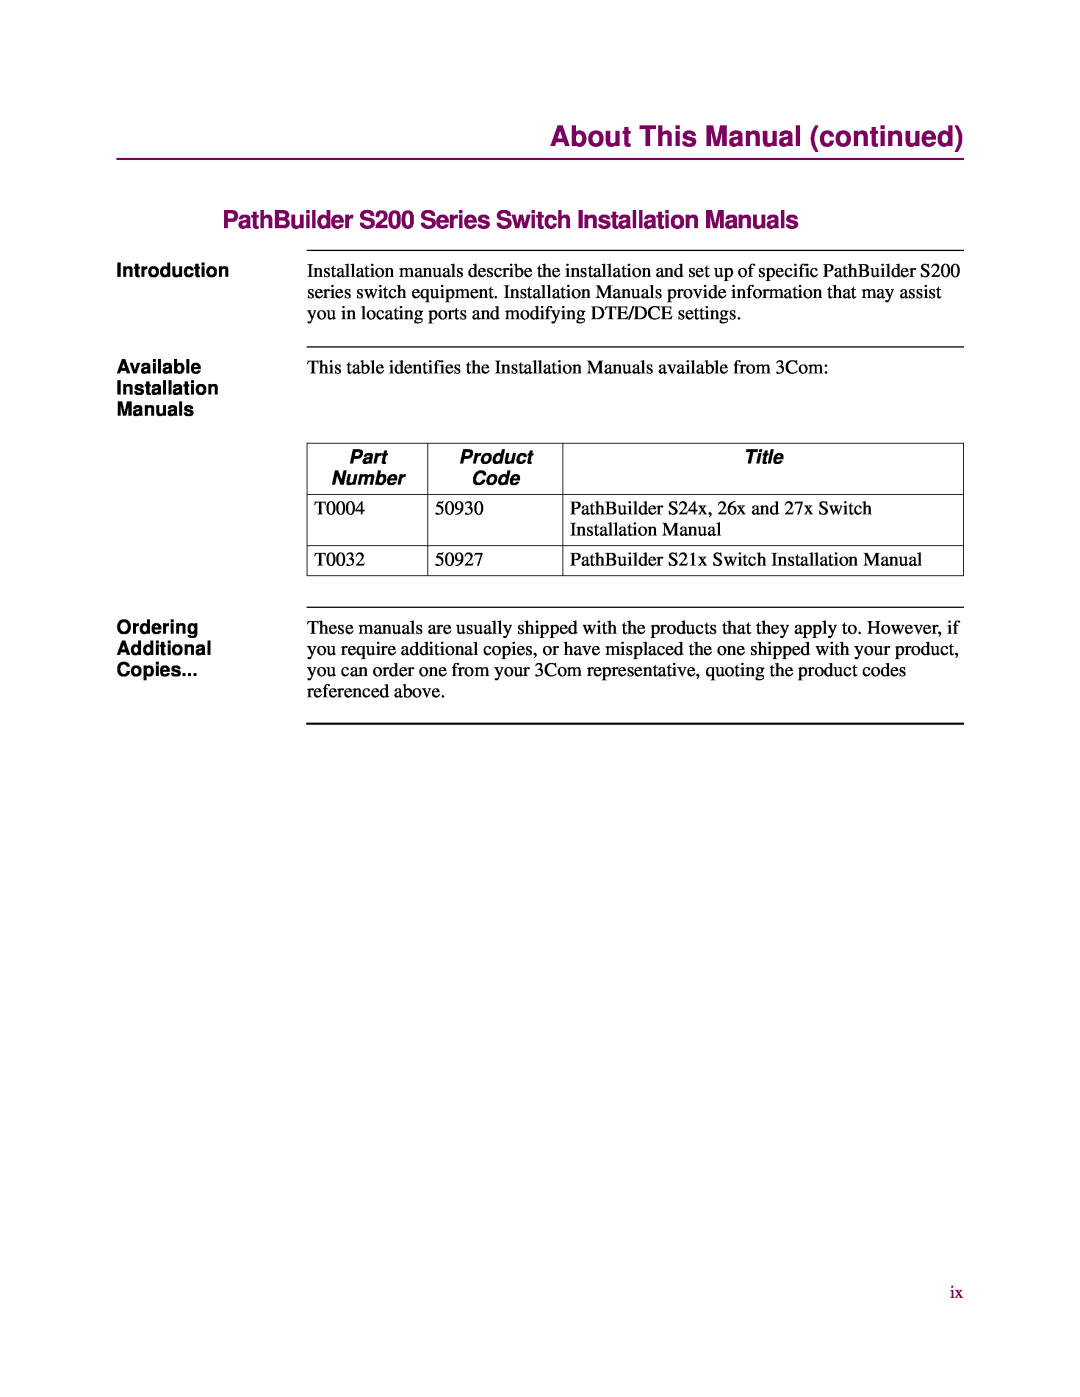 3Com About This Manual continued, PathBuilder S200 Series Switch Installation Manuals, Available, Ordering, Additional 